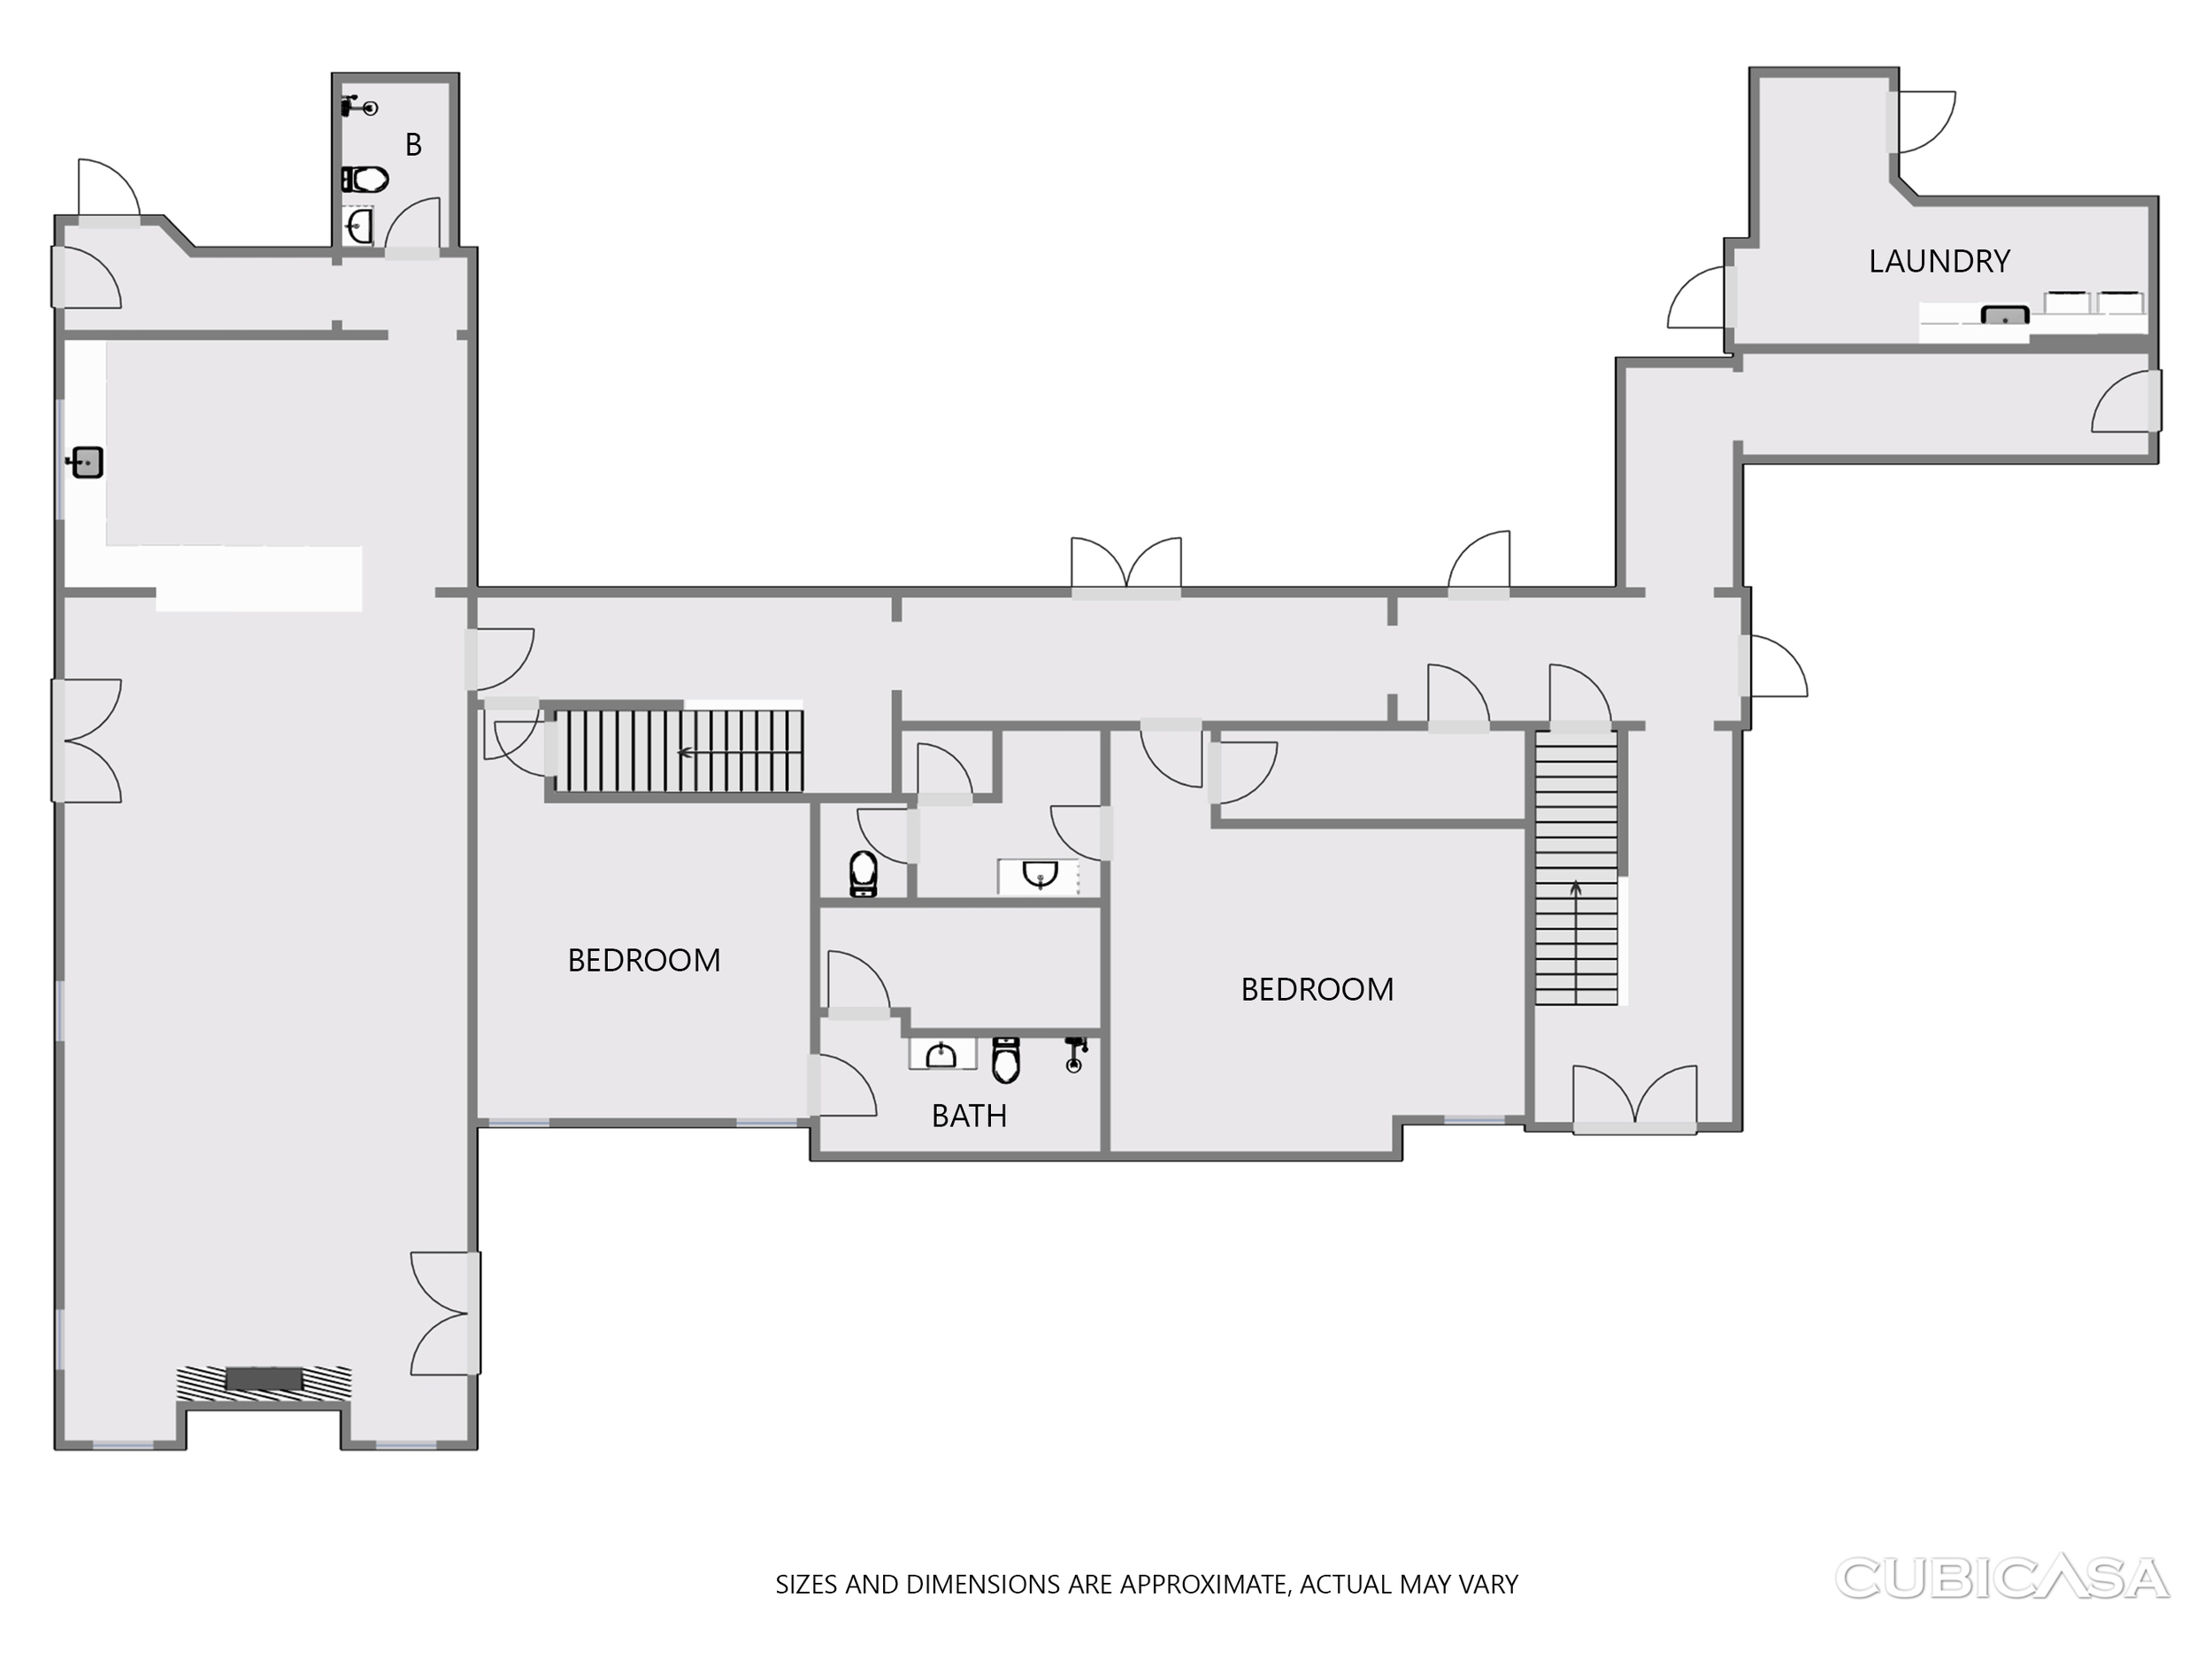 101-Basement-2D Unfurnished-No Perspective-We Get Around CubiCasa Luxury Residential Real Estate Example.jpg